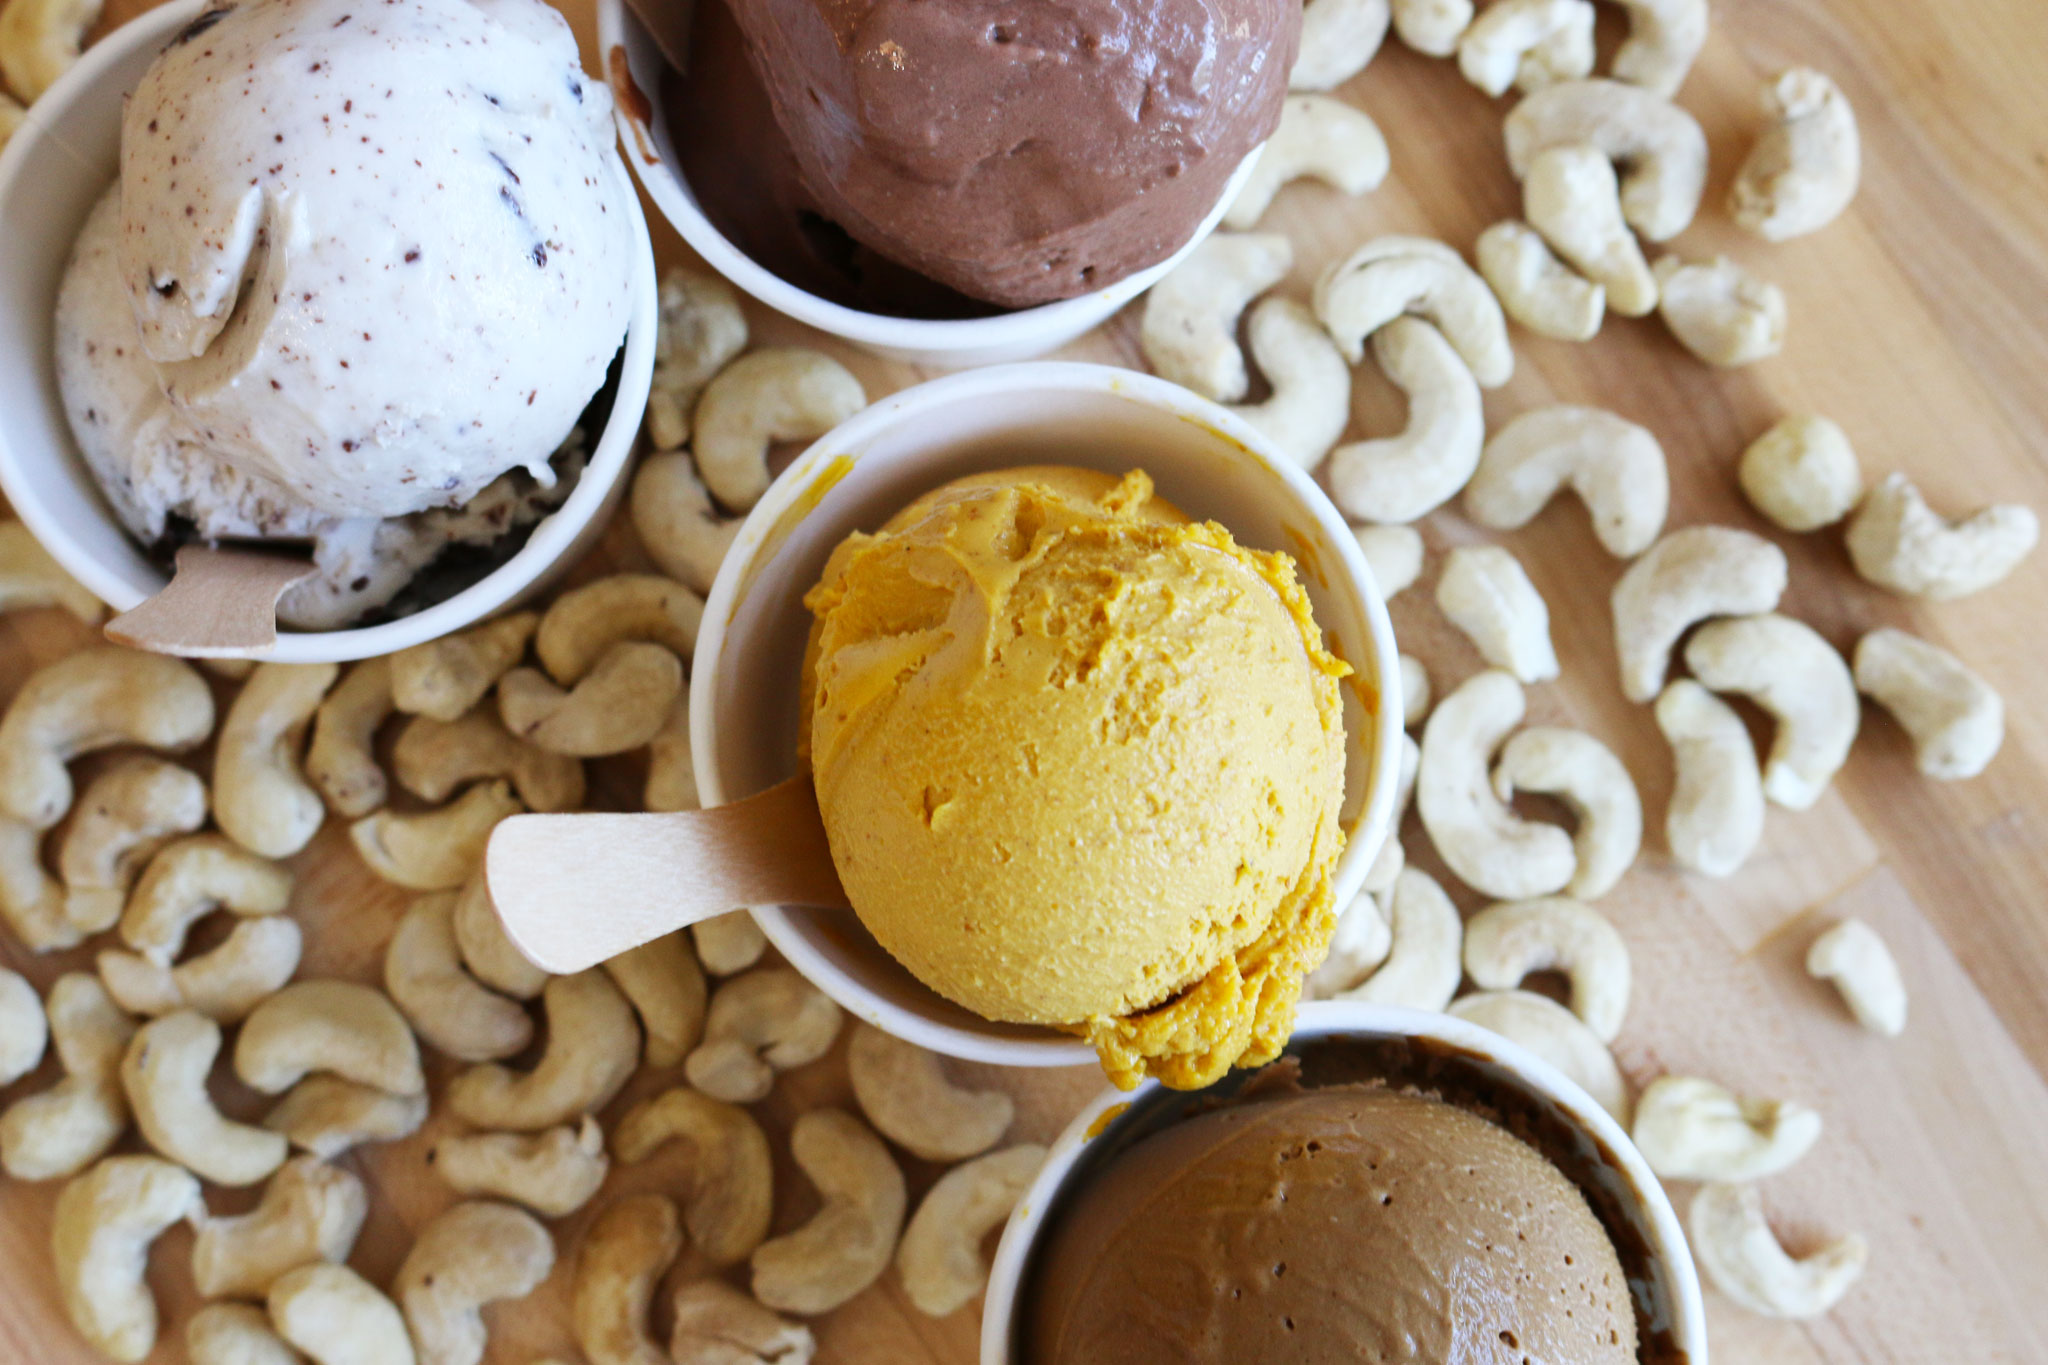 Cashew Cow flavors in Tucson